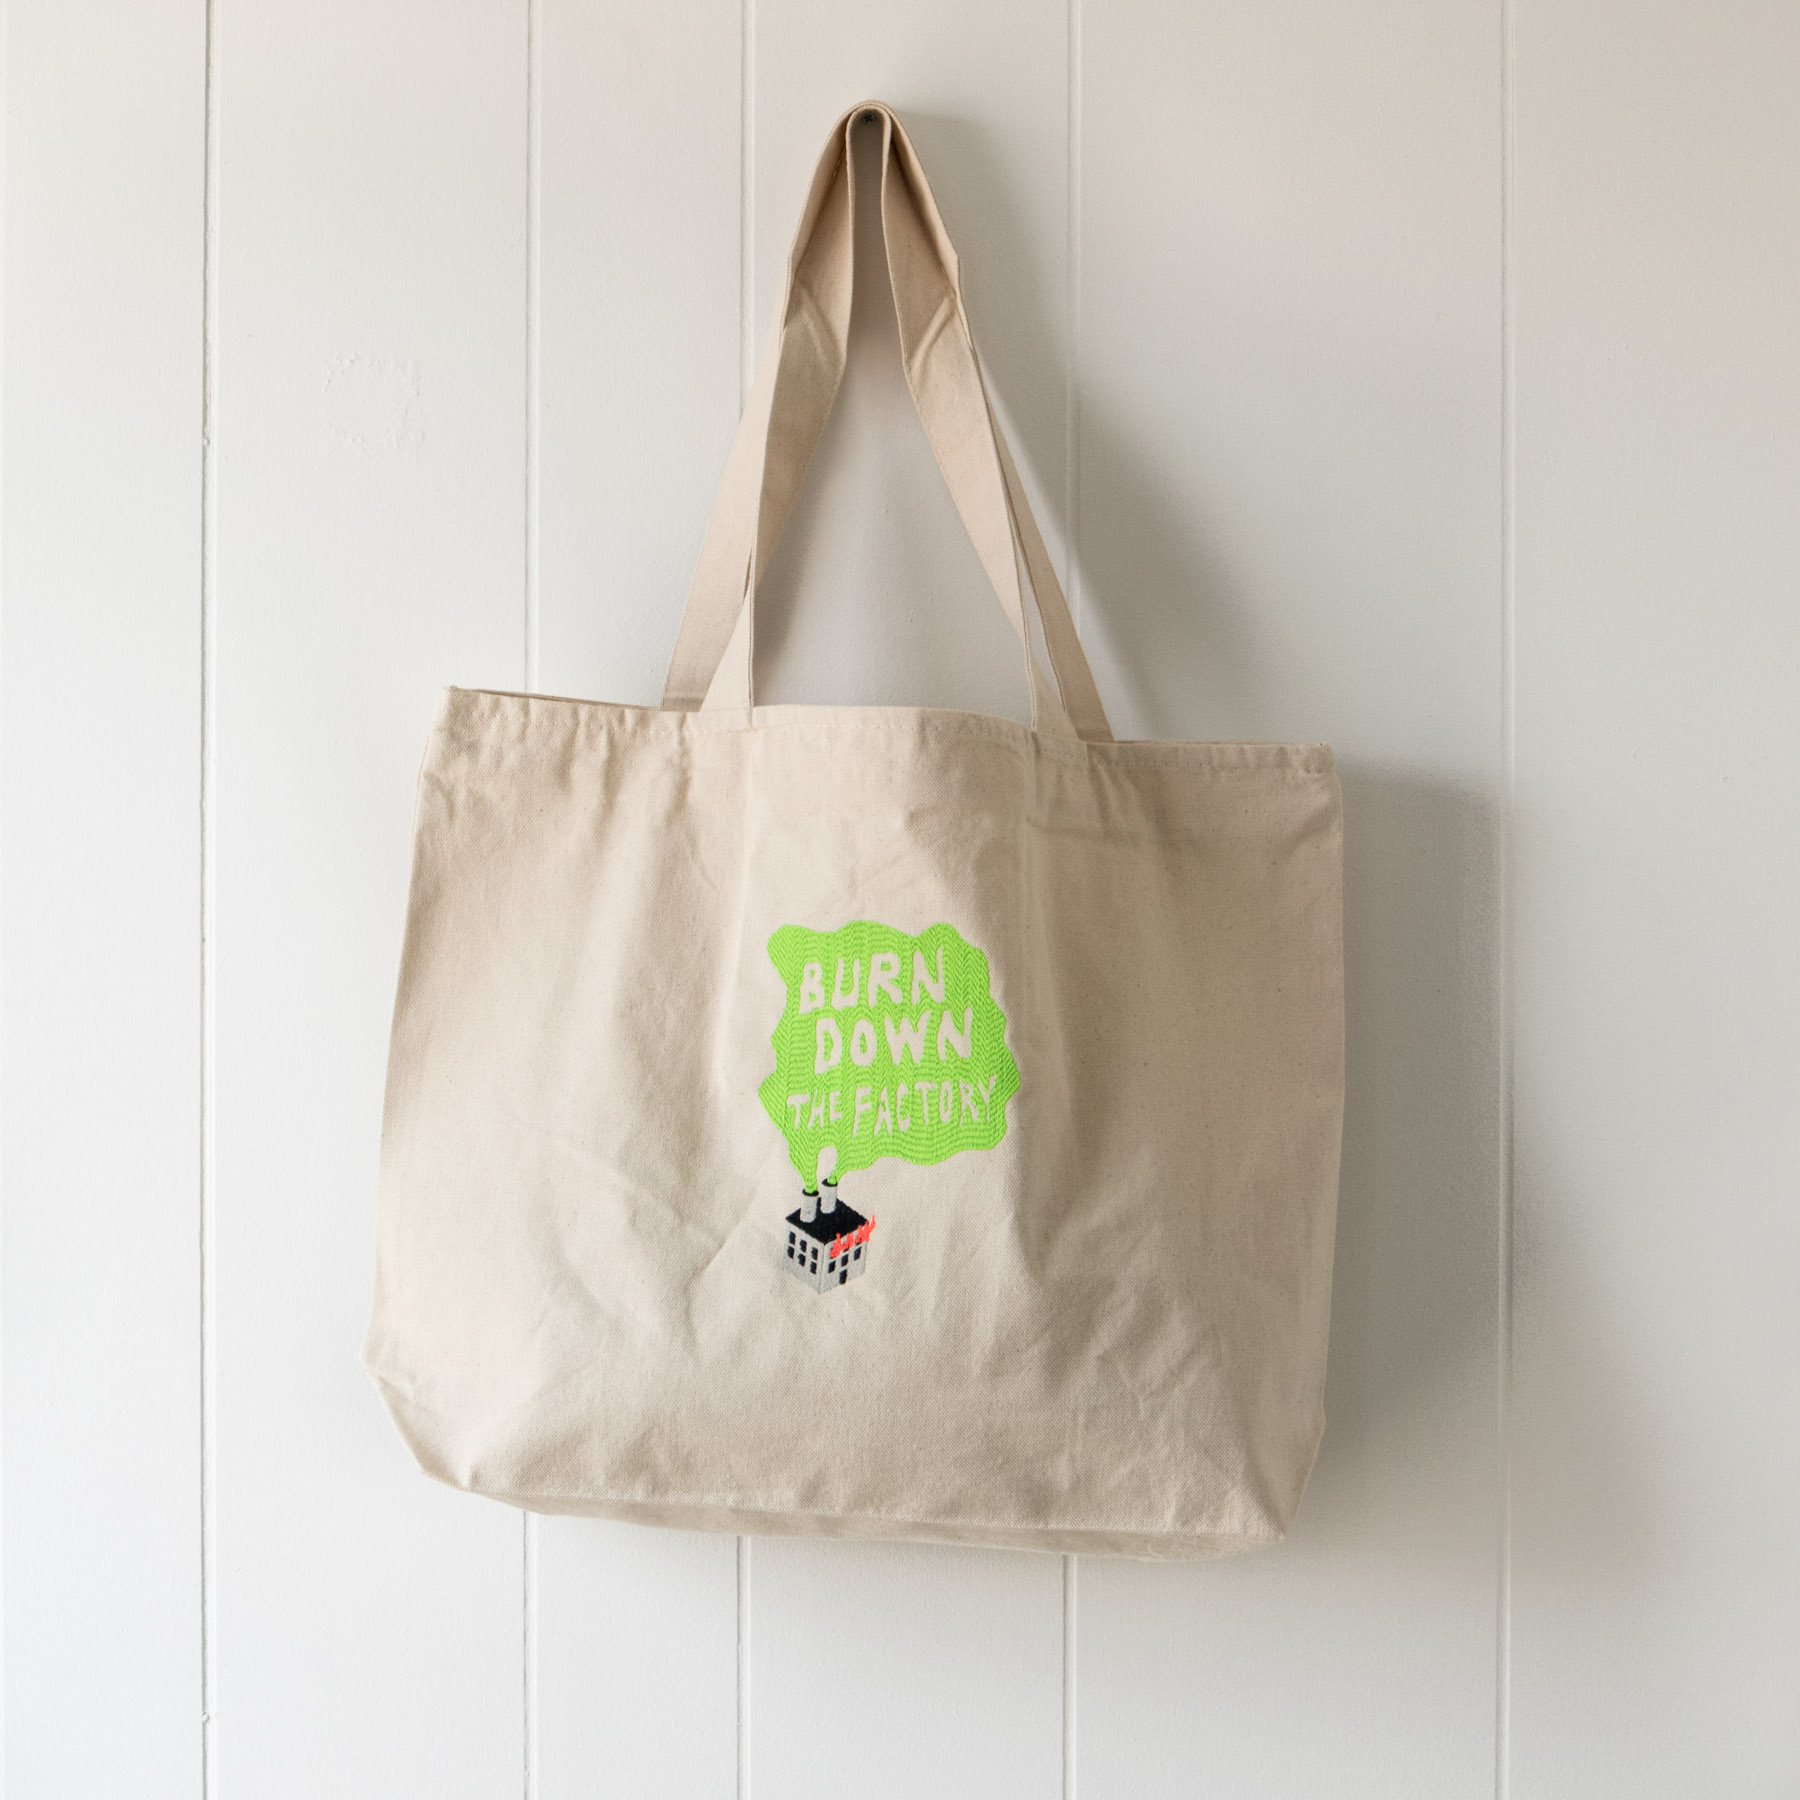 Product image - canvas tote bag with Burn Down the Factory embroidered design